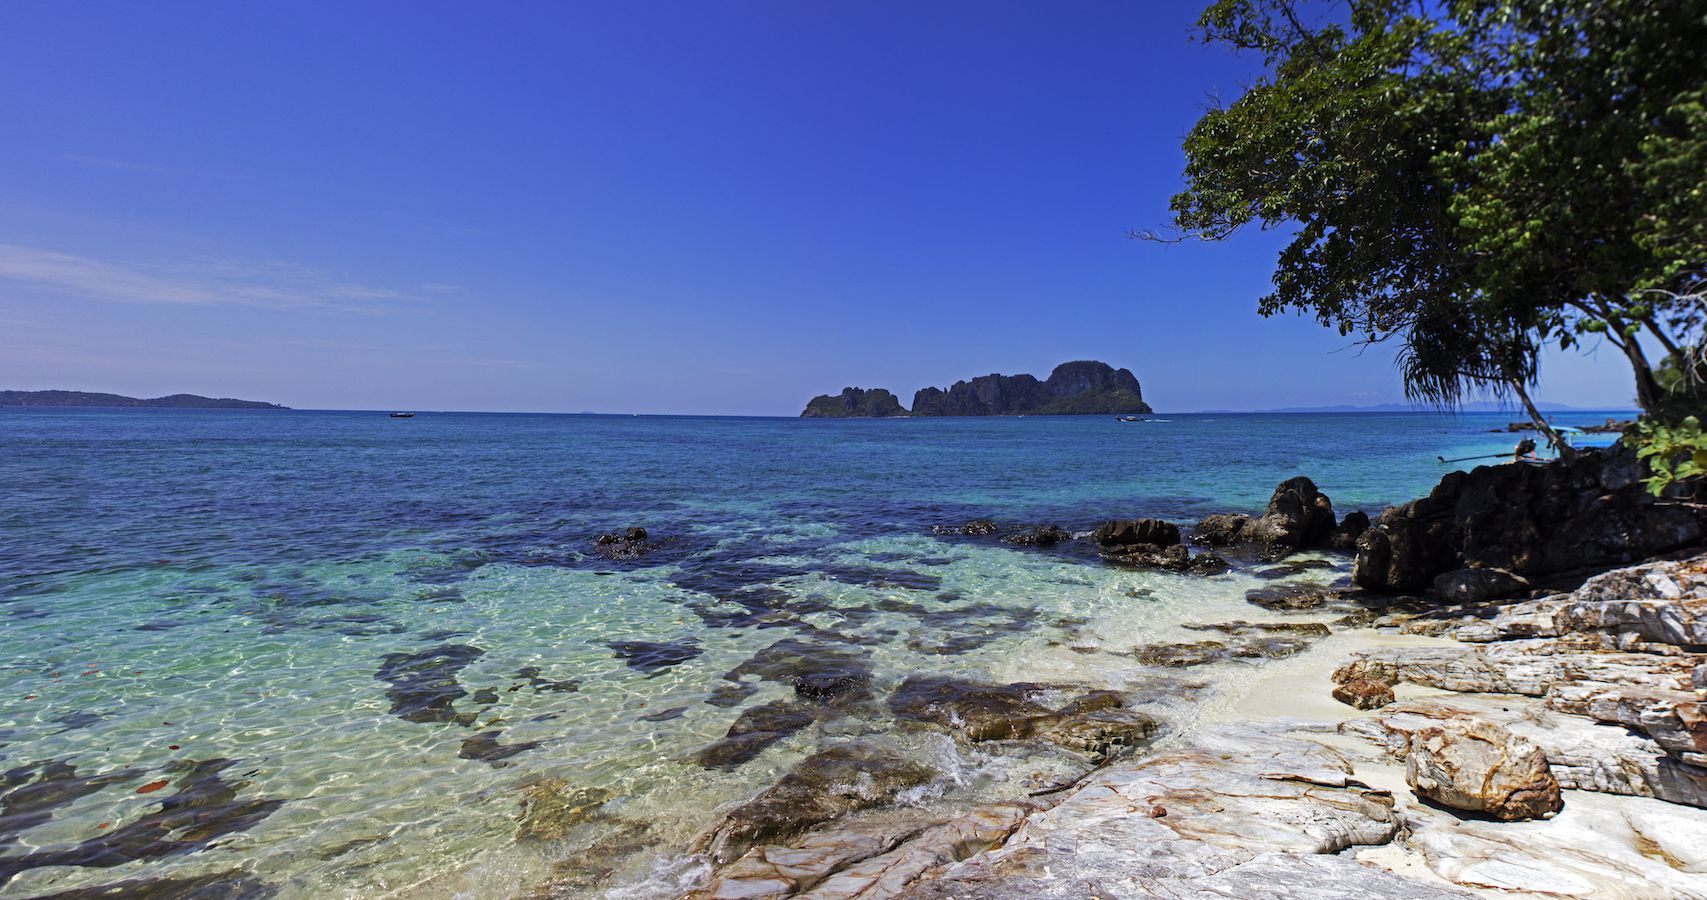 Panoramic view of the beach on Bamboo Island, Thailand